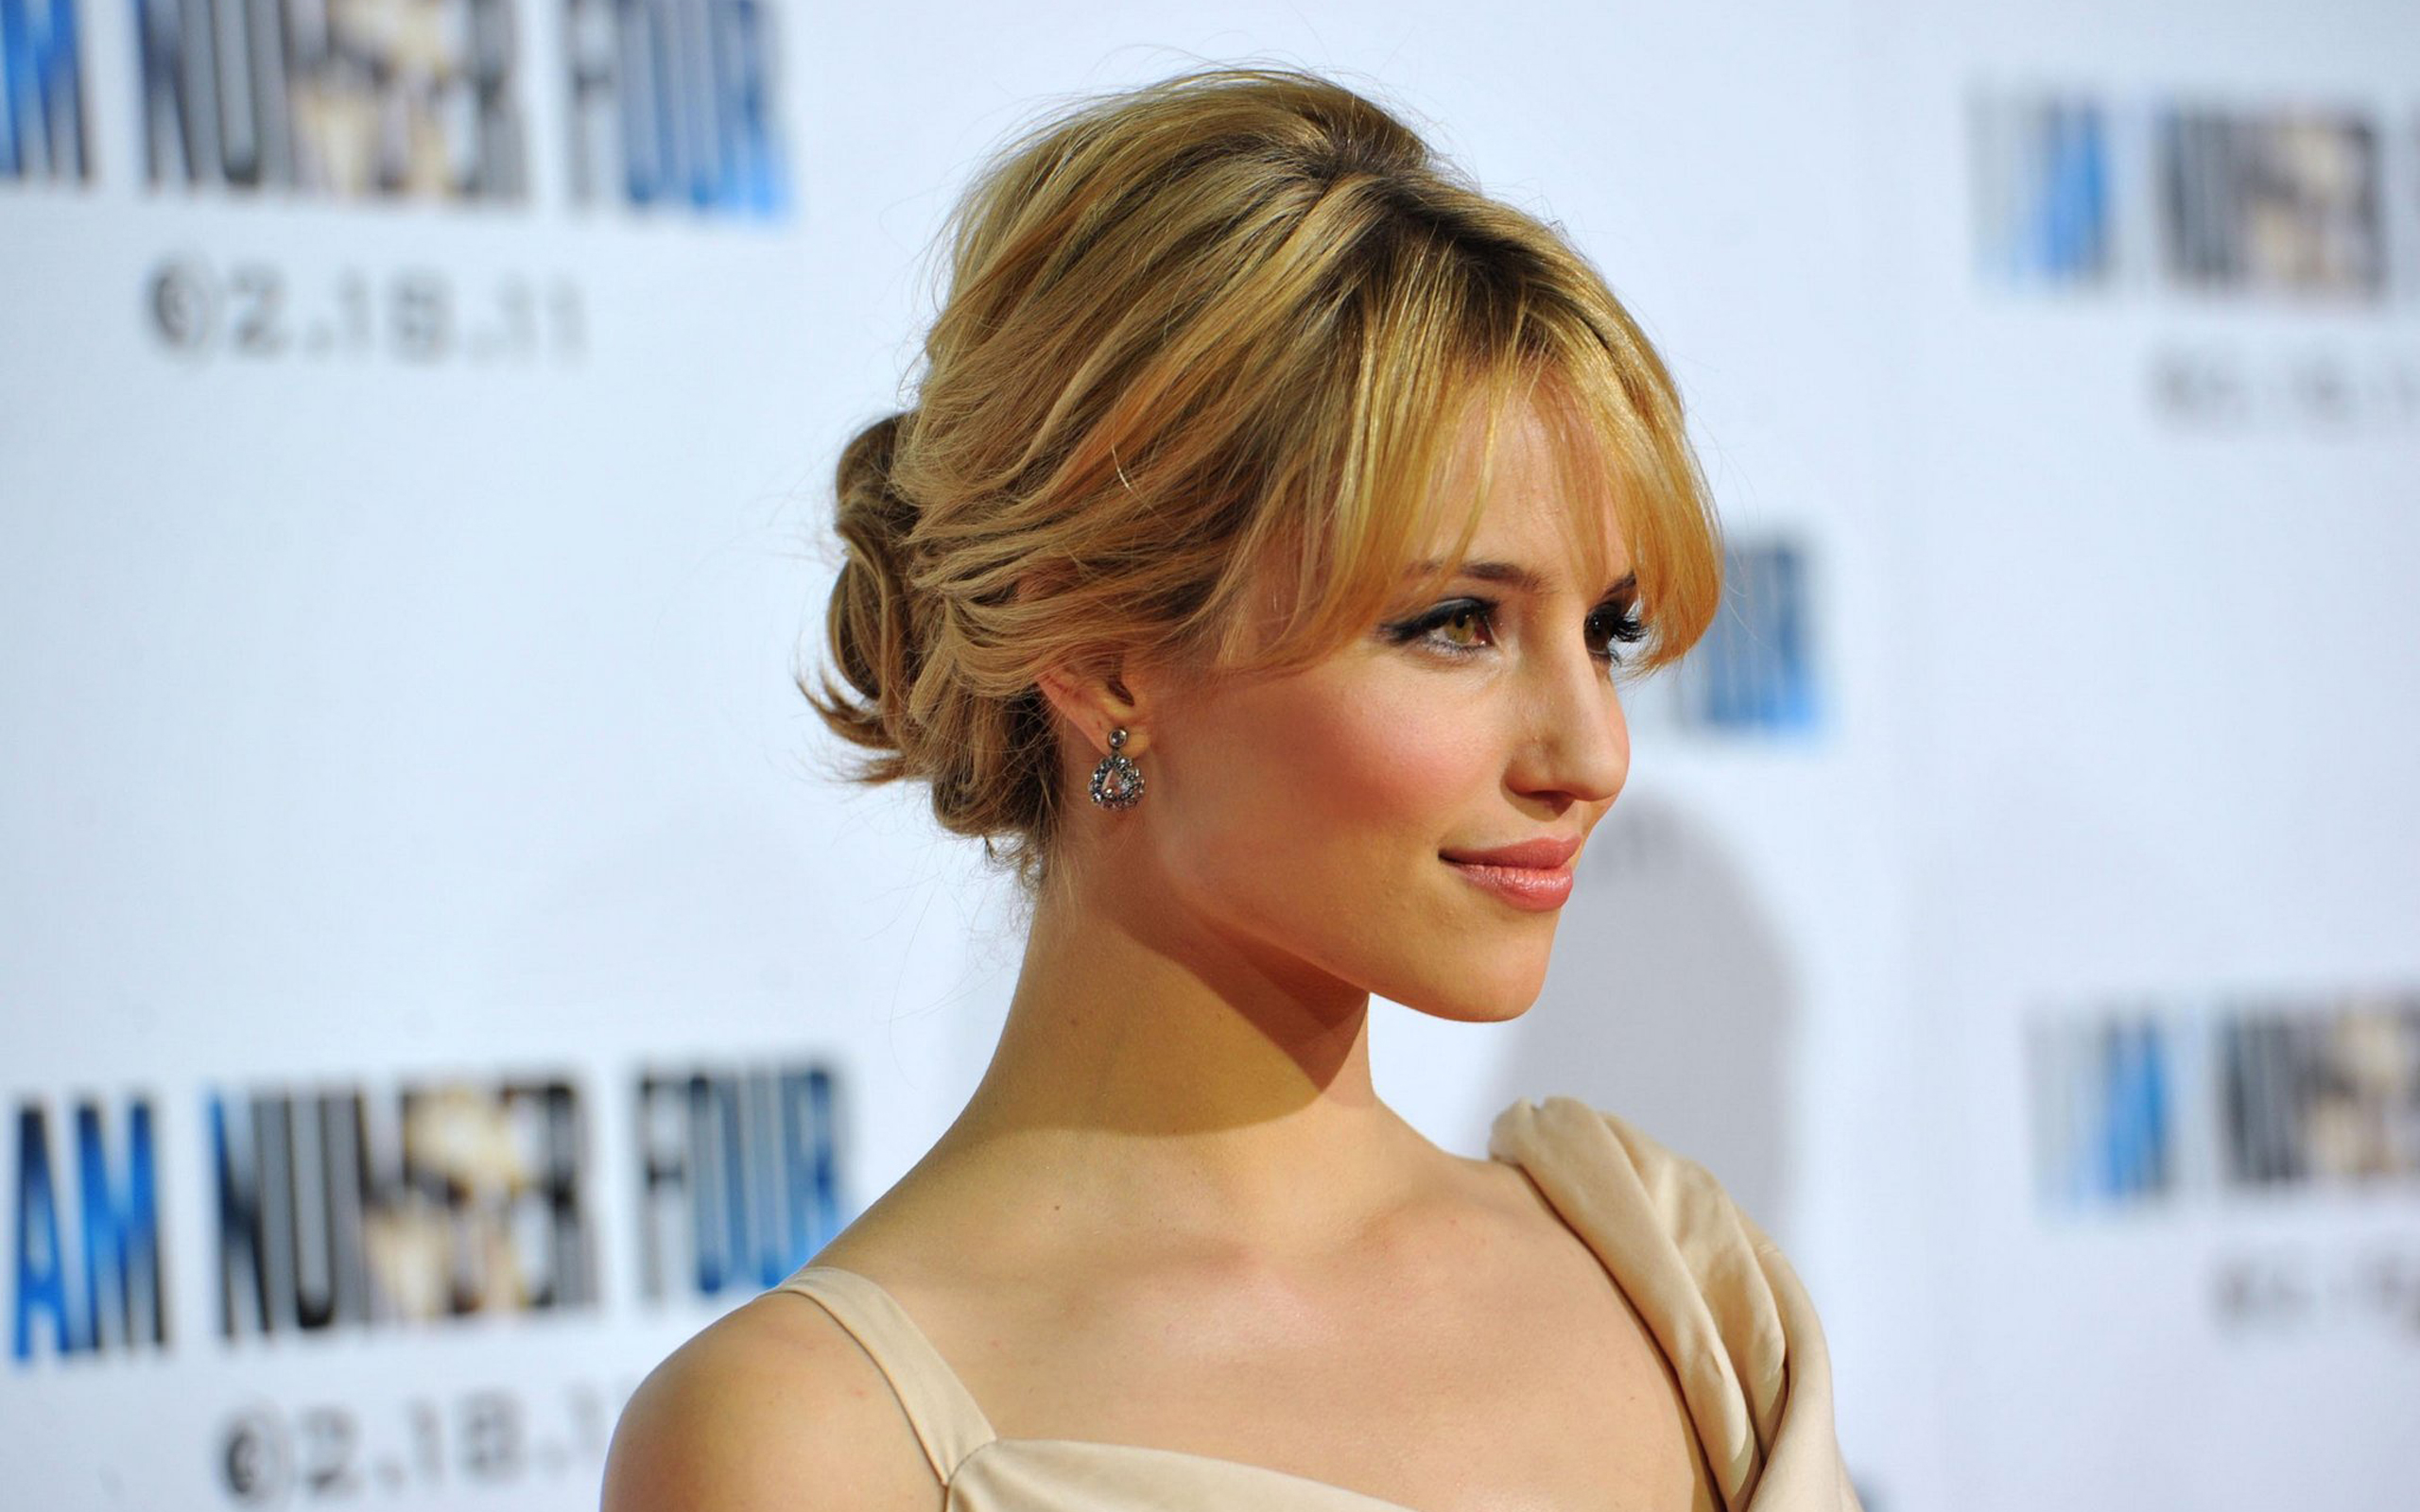 celebrity, dianna agron, actress, american